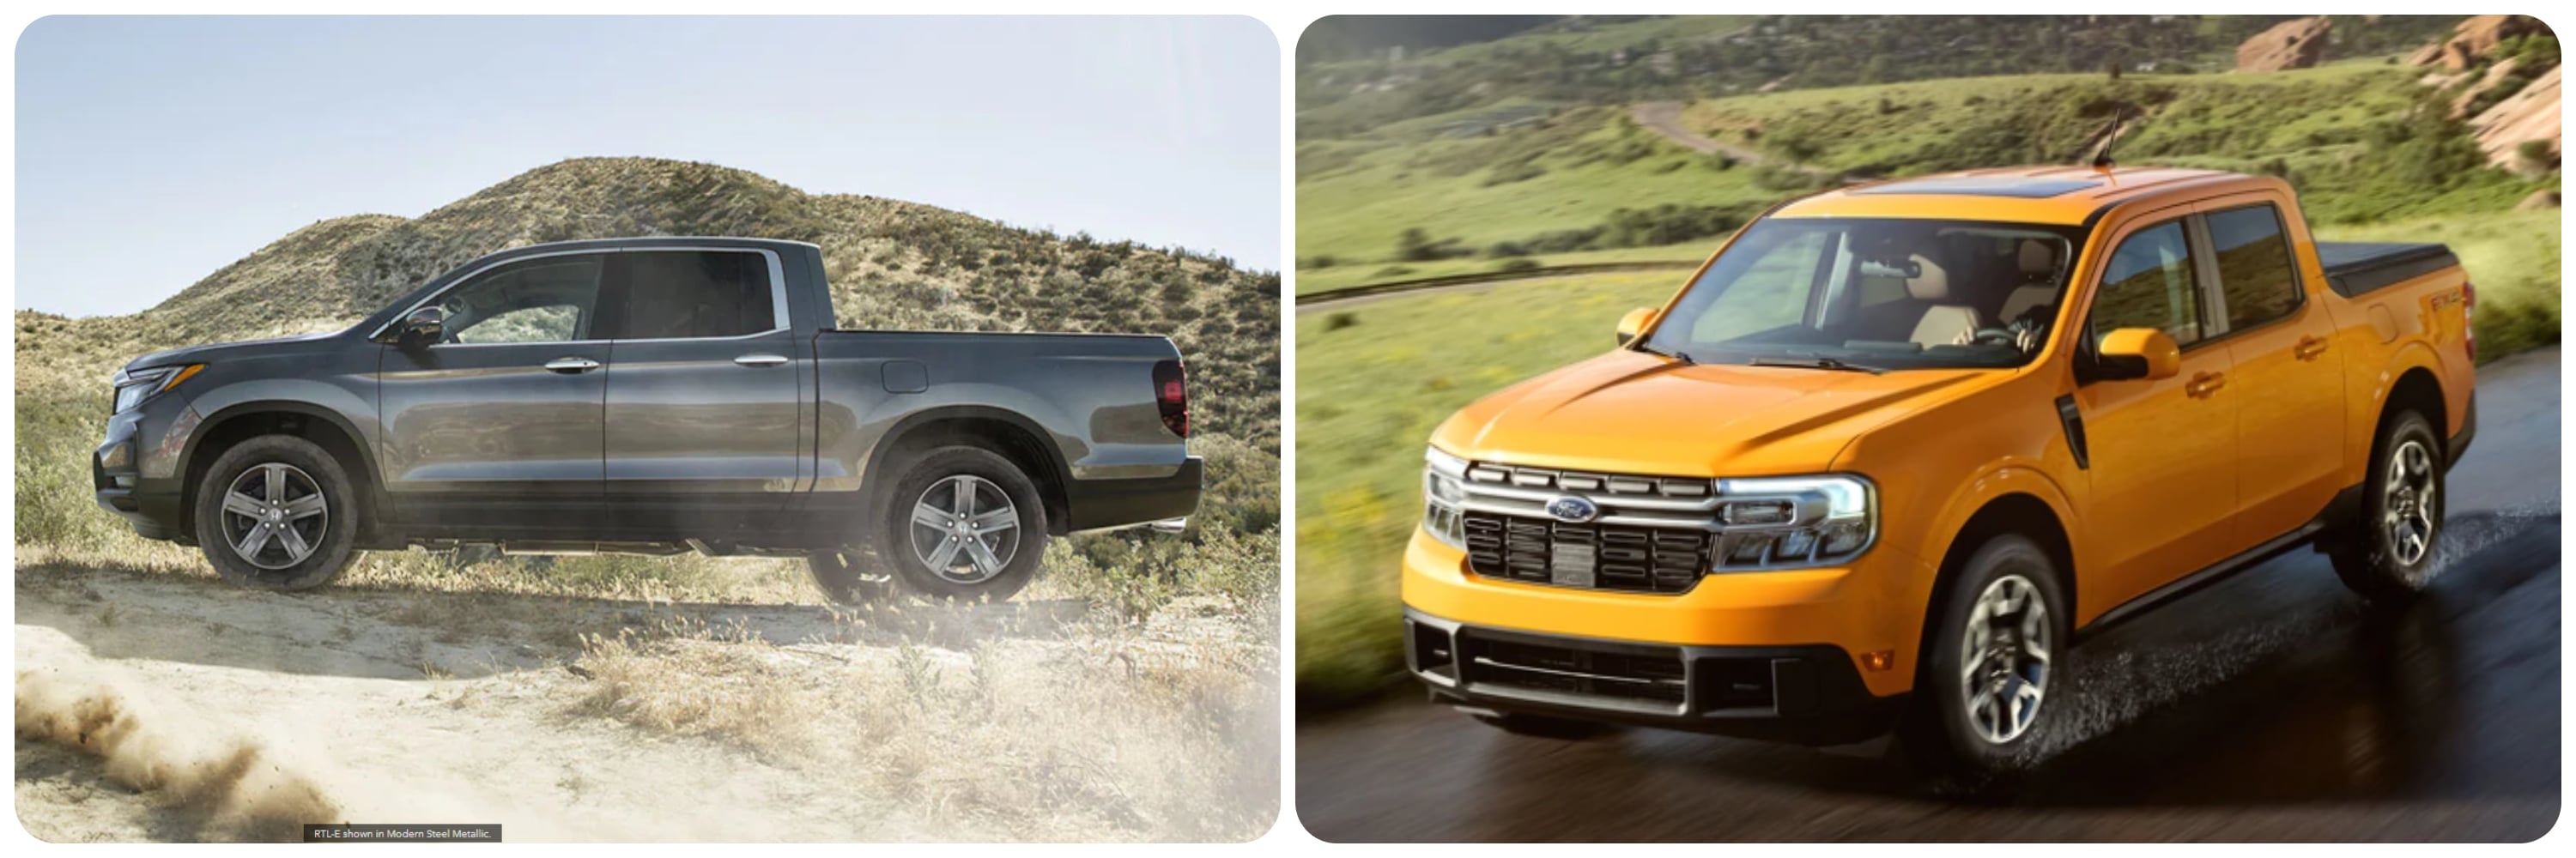 On the left a gray 2022 honda Ridgeline sits parked on a dirt hill in profile view. On the right a yellow 2022 Ford Maverick drives down a wet country road on a sunny day